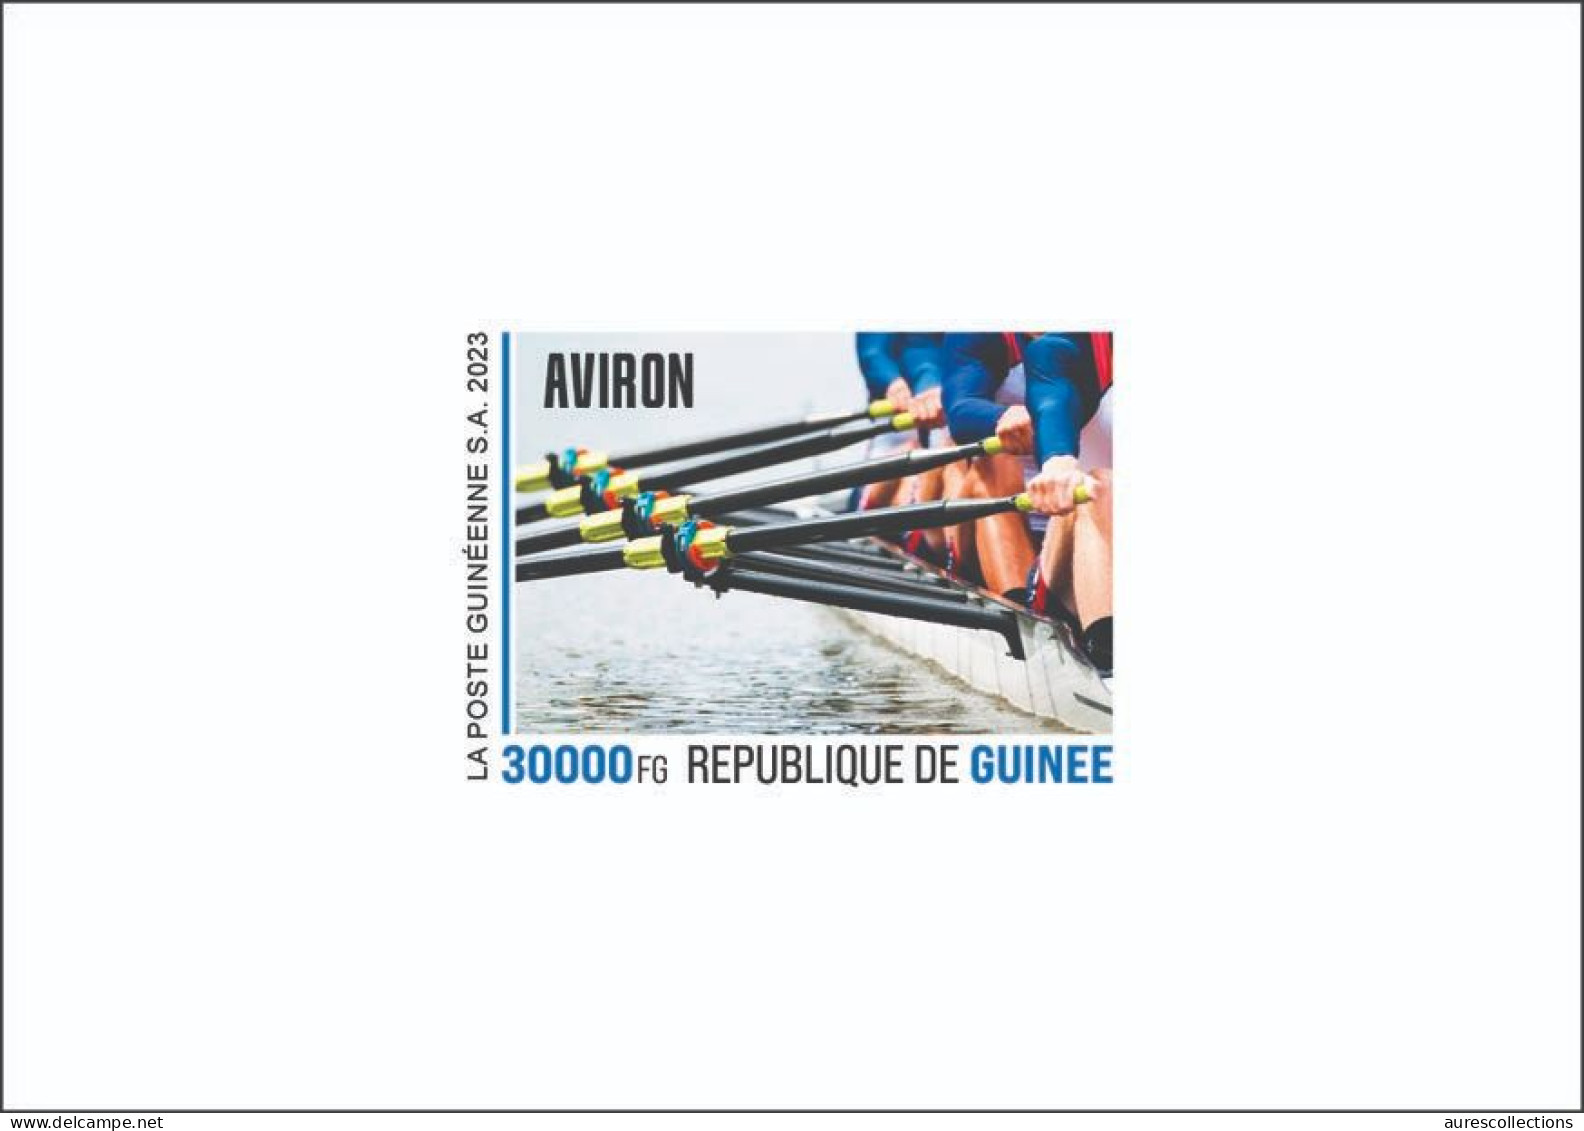 GUINEA 2023 DELUXE PROOF - OLYMPIC GAMES PARIS FRANCE 2024 - ROWING AVIRON - Aviron